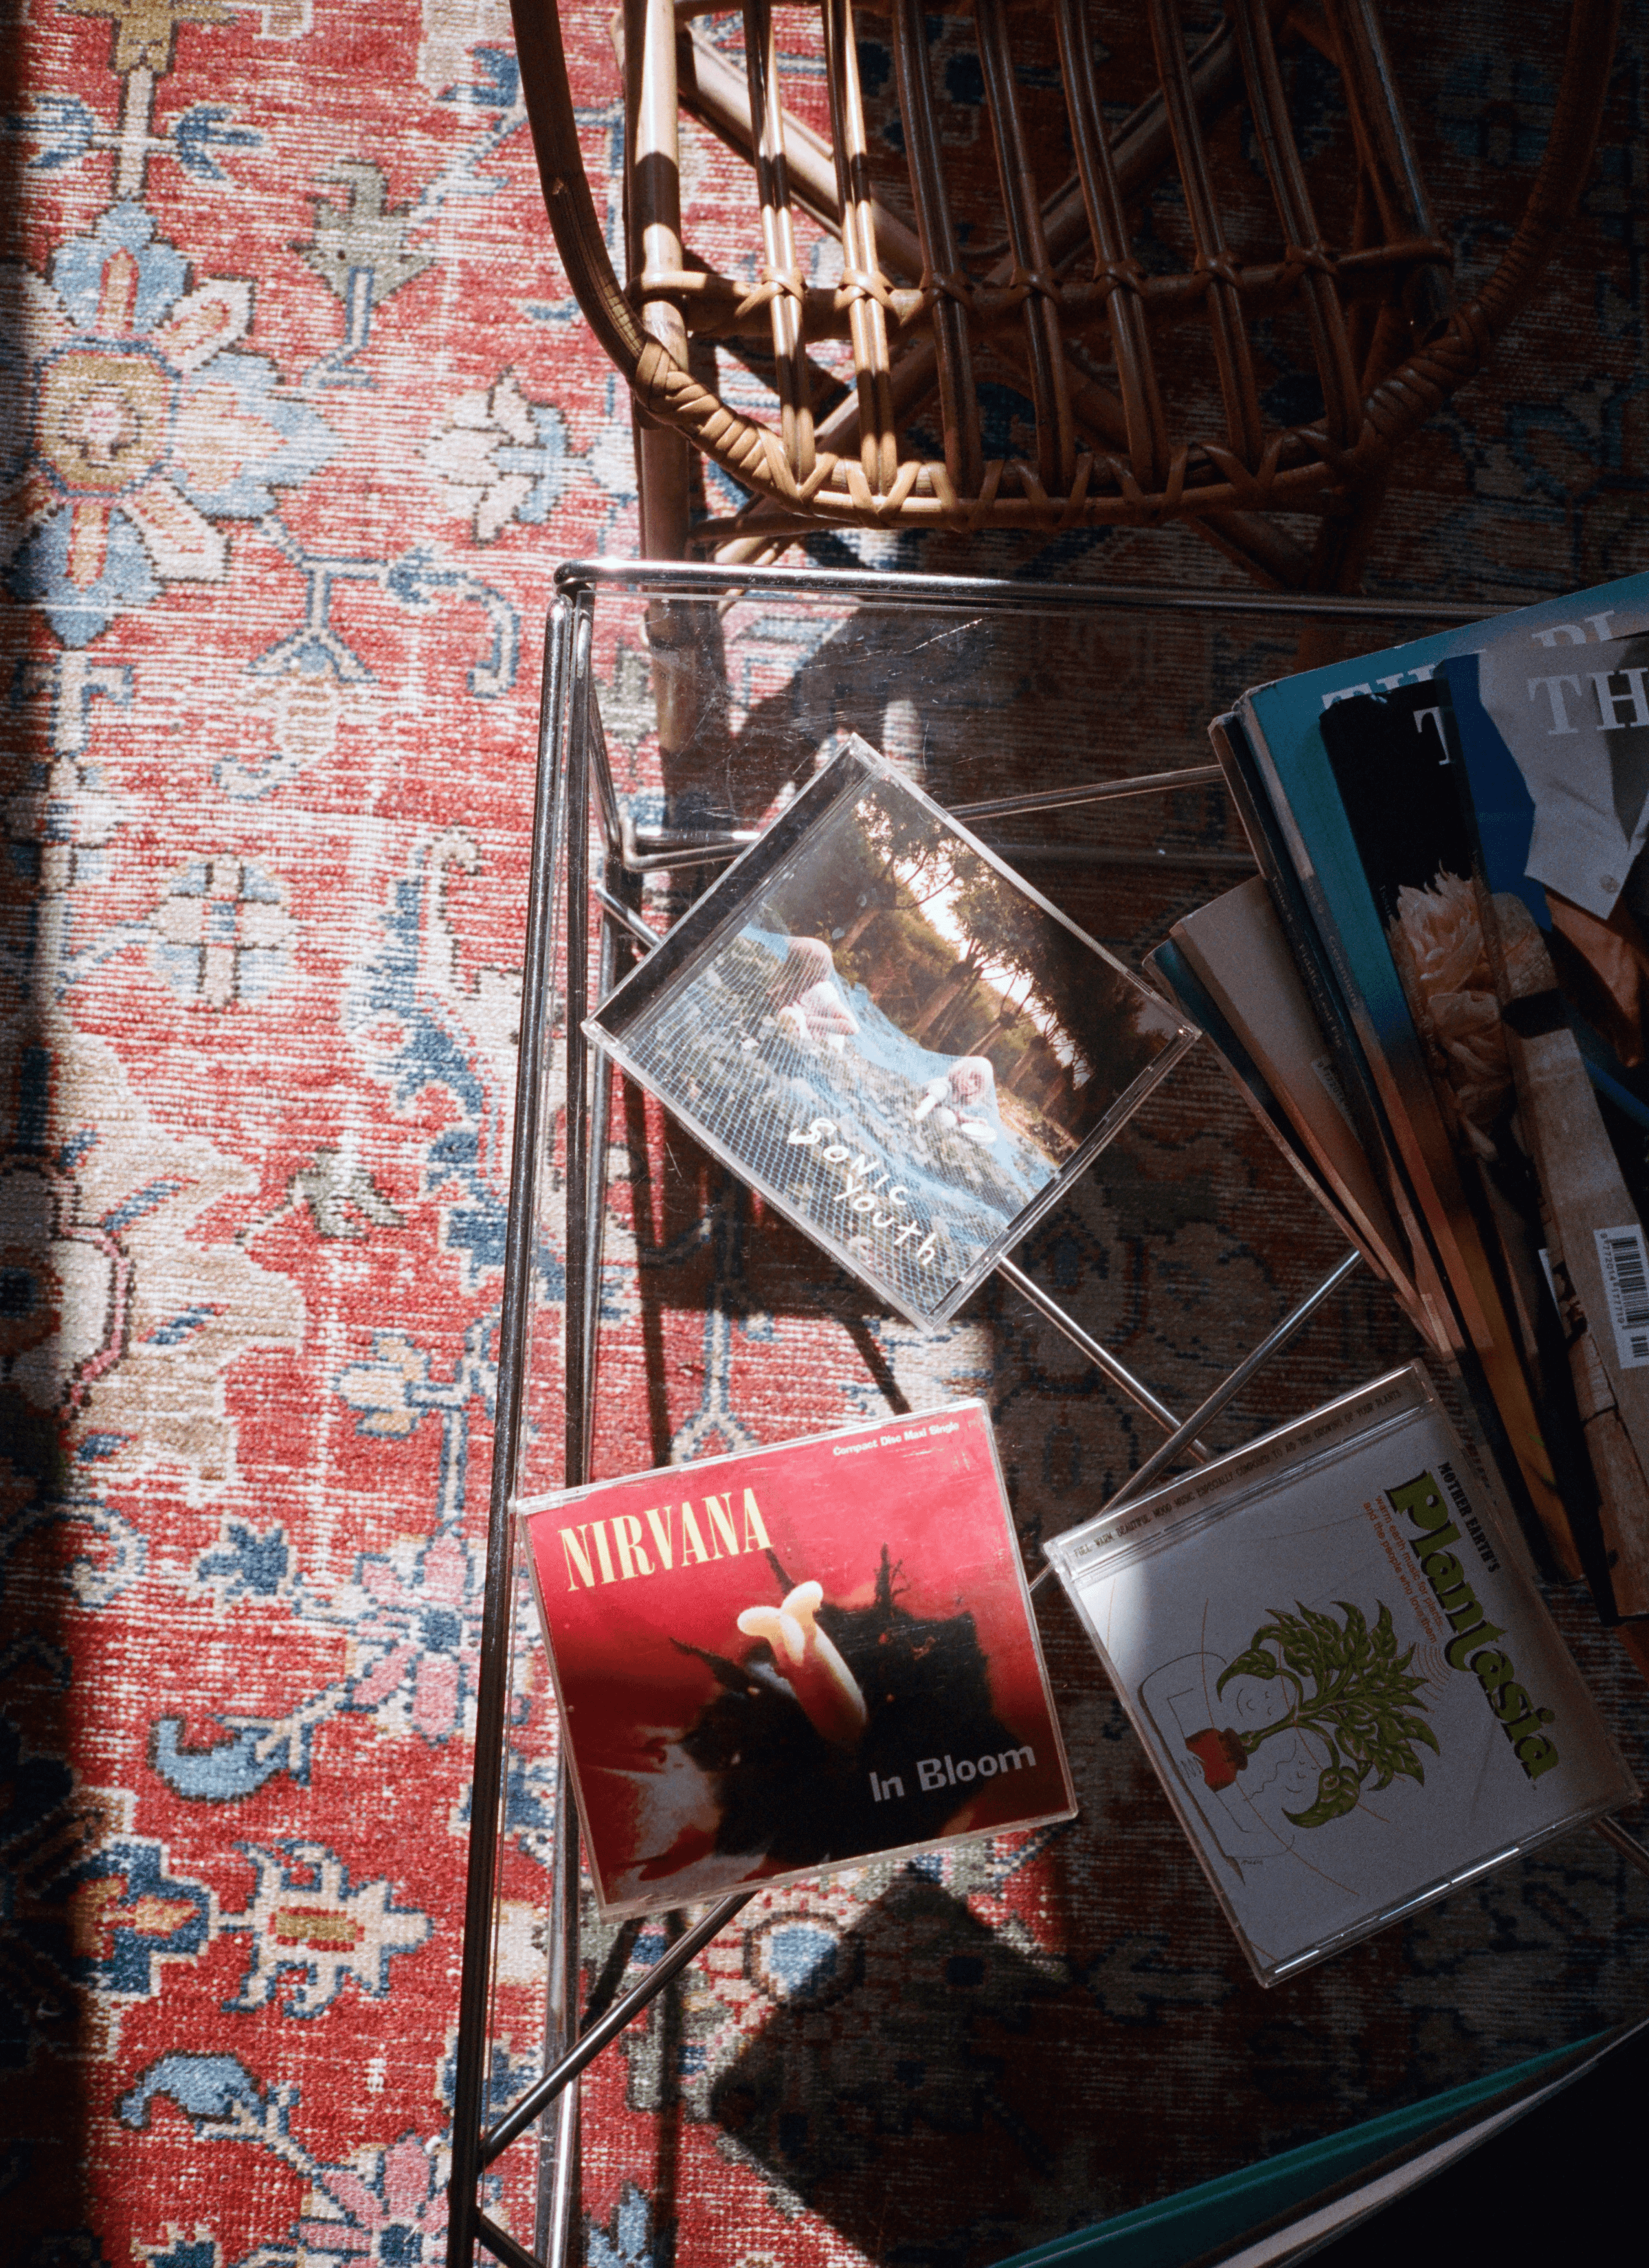 A collection of CDs and magazines on the glass table on a colour-faded carpet next to a bamboo or wooden chair.